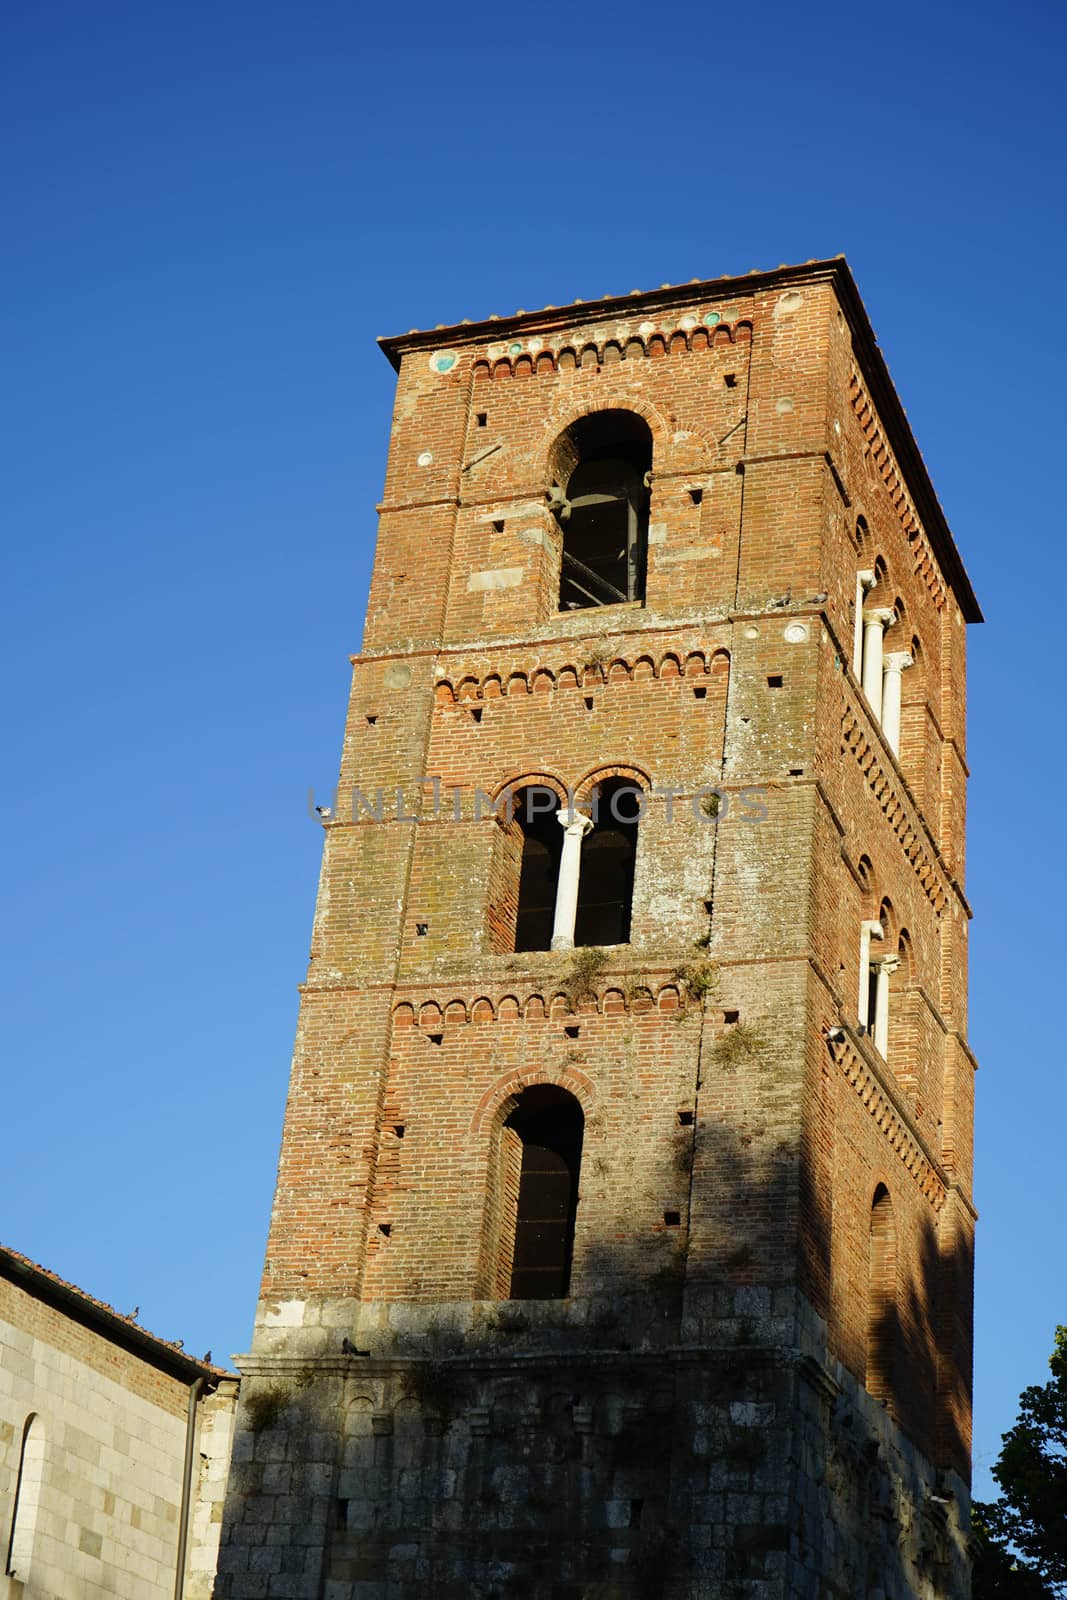 Leaning bell tower of the Church of San Michele degli Scalzi, Pi by cosca